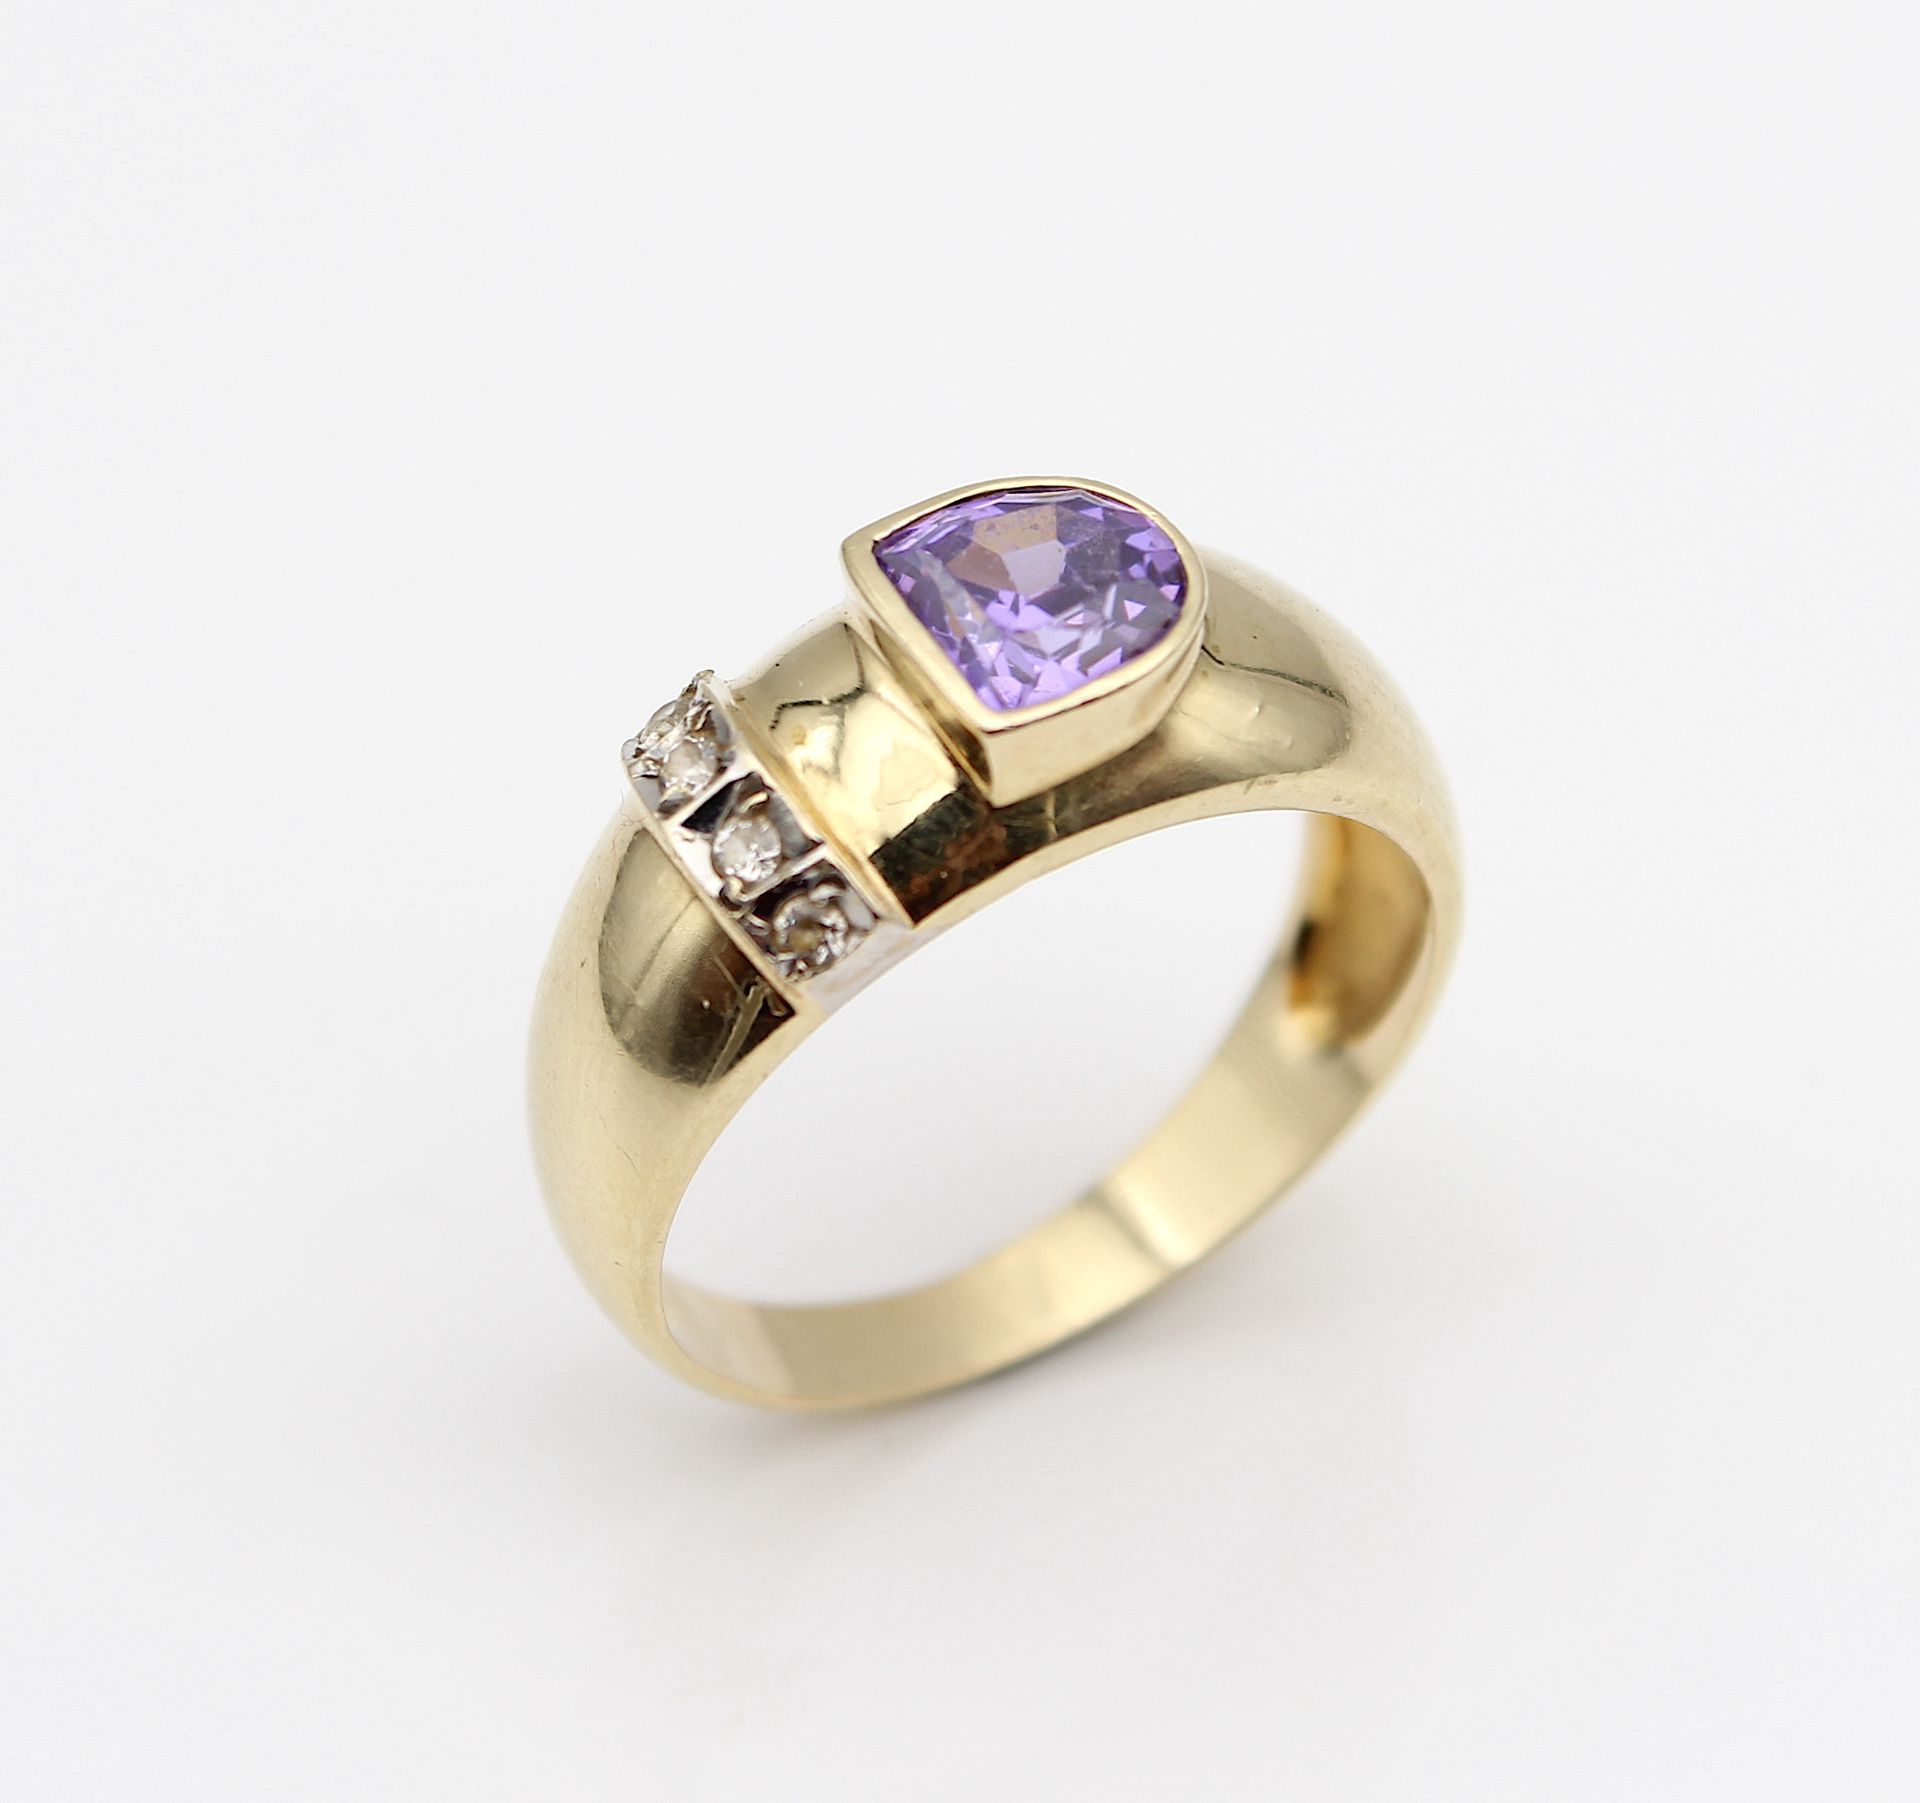 Decorative ring with colored cubic zirconia